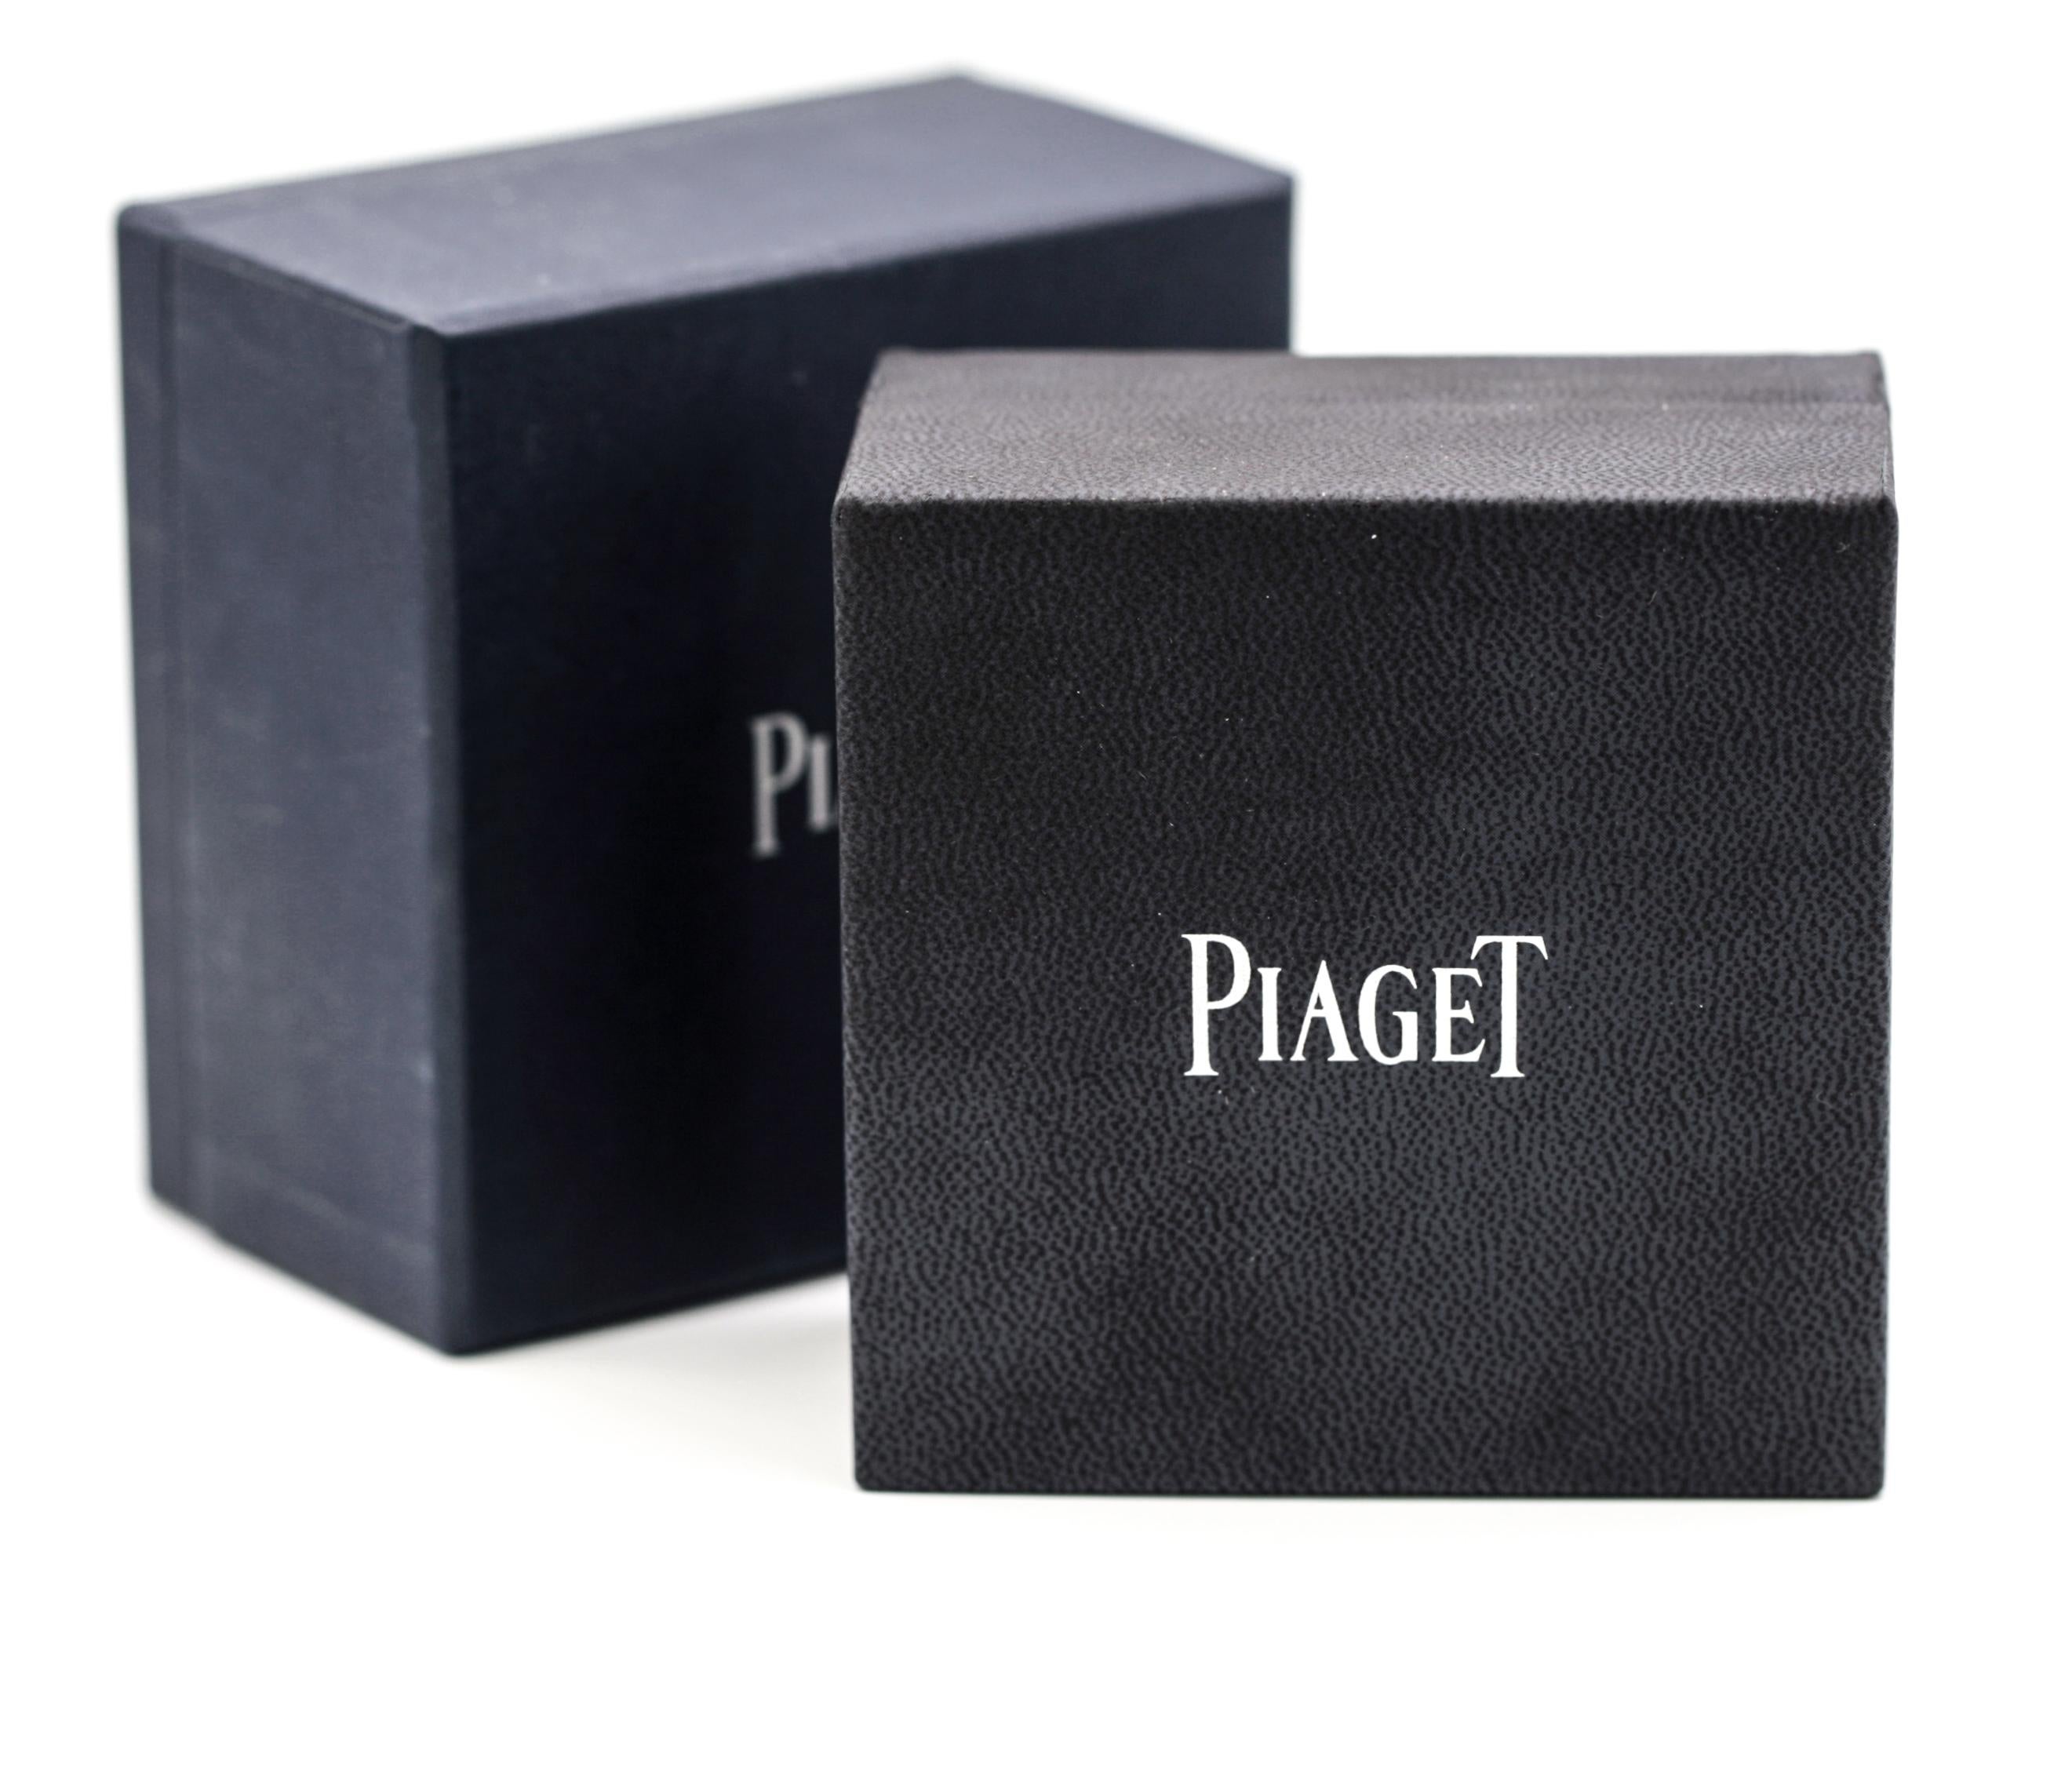 This Piaget Bangle Bracelet has a few pave white diamonds on the sides, has 